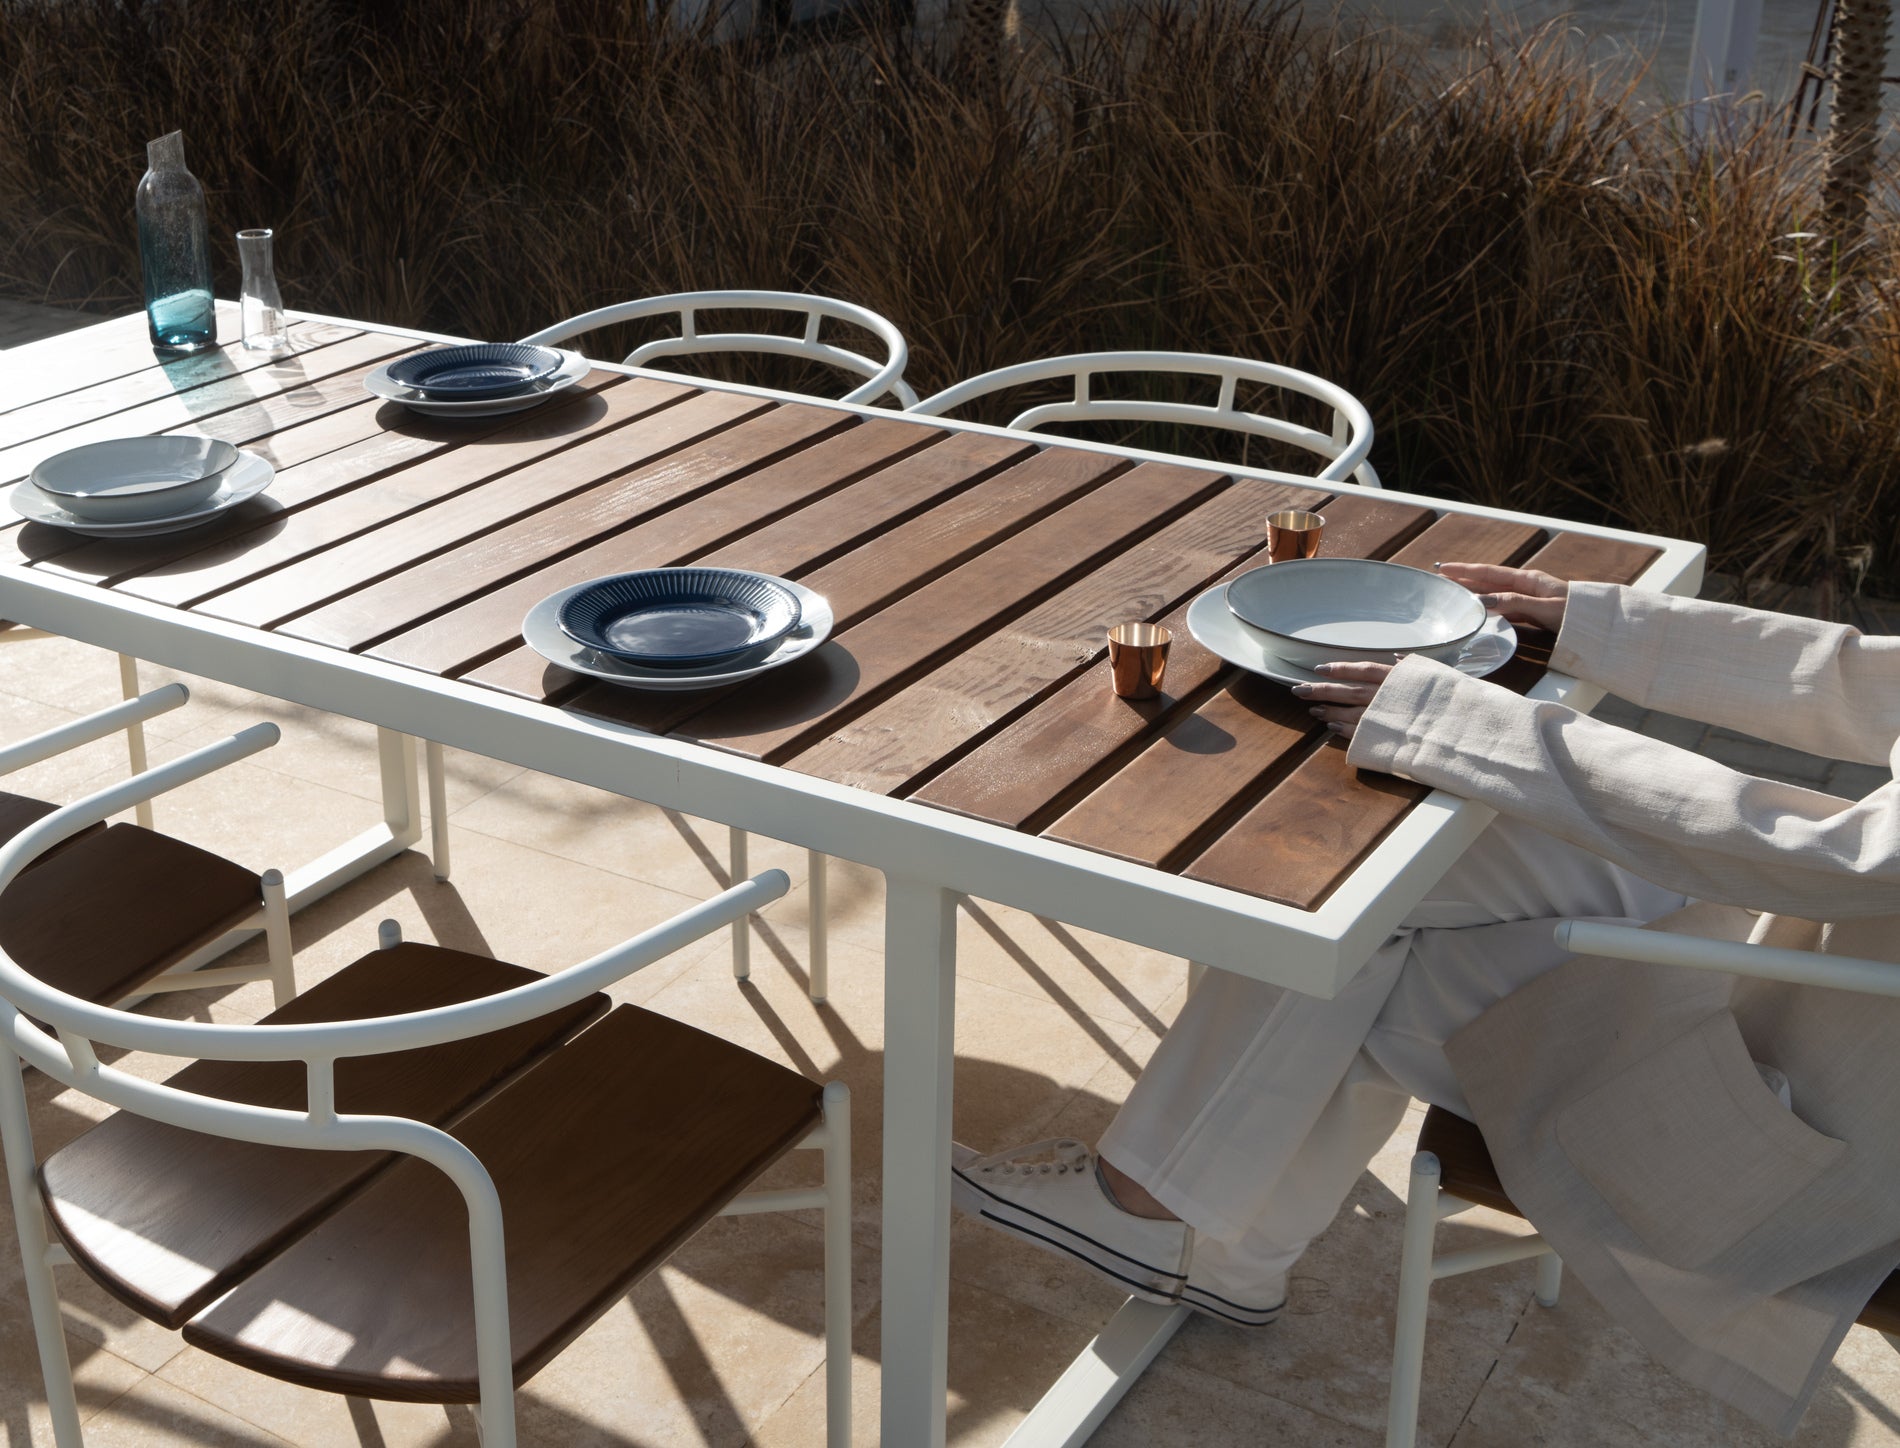 Yard Dining Set - CASA Designs- The Mob Collective